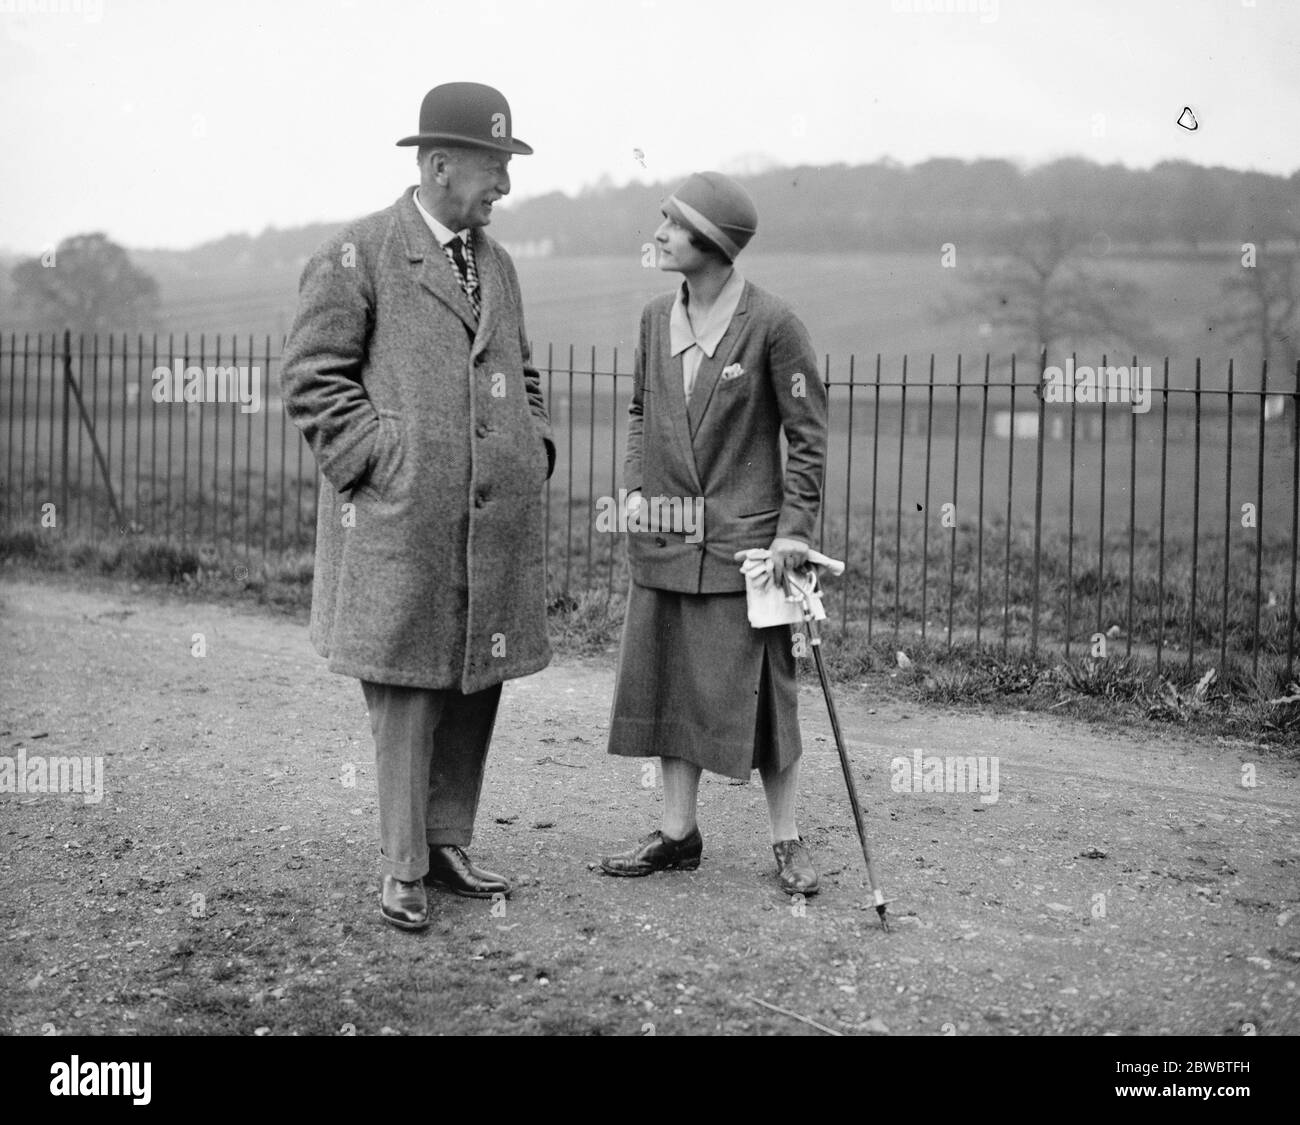 Hertfordshire Hunt 's new Lady Master buys some of retired Master 's horses . Miss Alice Angela Beit ( daughter of Sir Otto Beit ) who has succeeded Mr Walker in the Mastership of the Hertfordshire Hunt was present at the sale of Mr Walker 's Hunt horses . Miss Beit with Mr Walker after the sale . 29 April 1926 Stock Photo